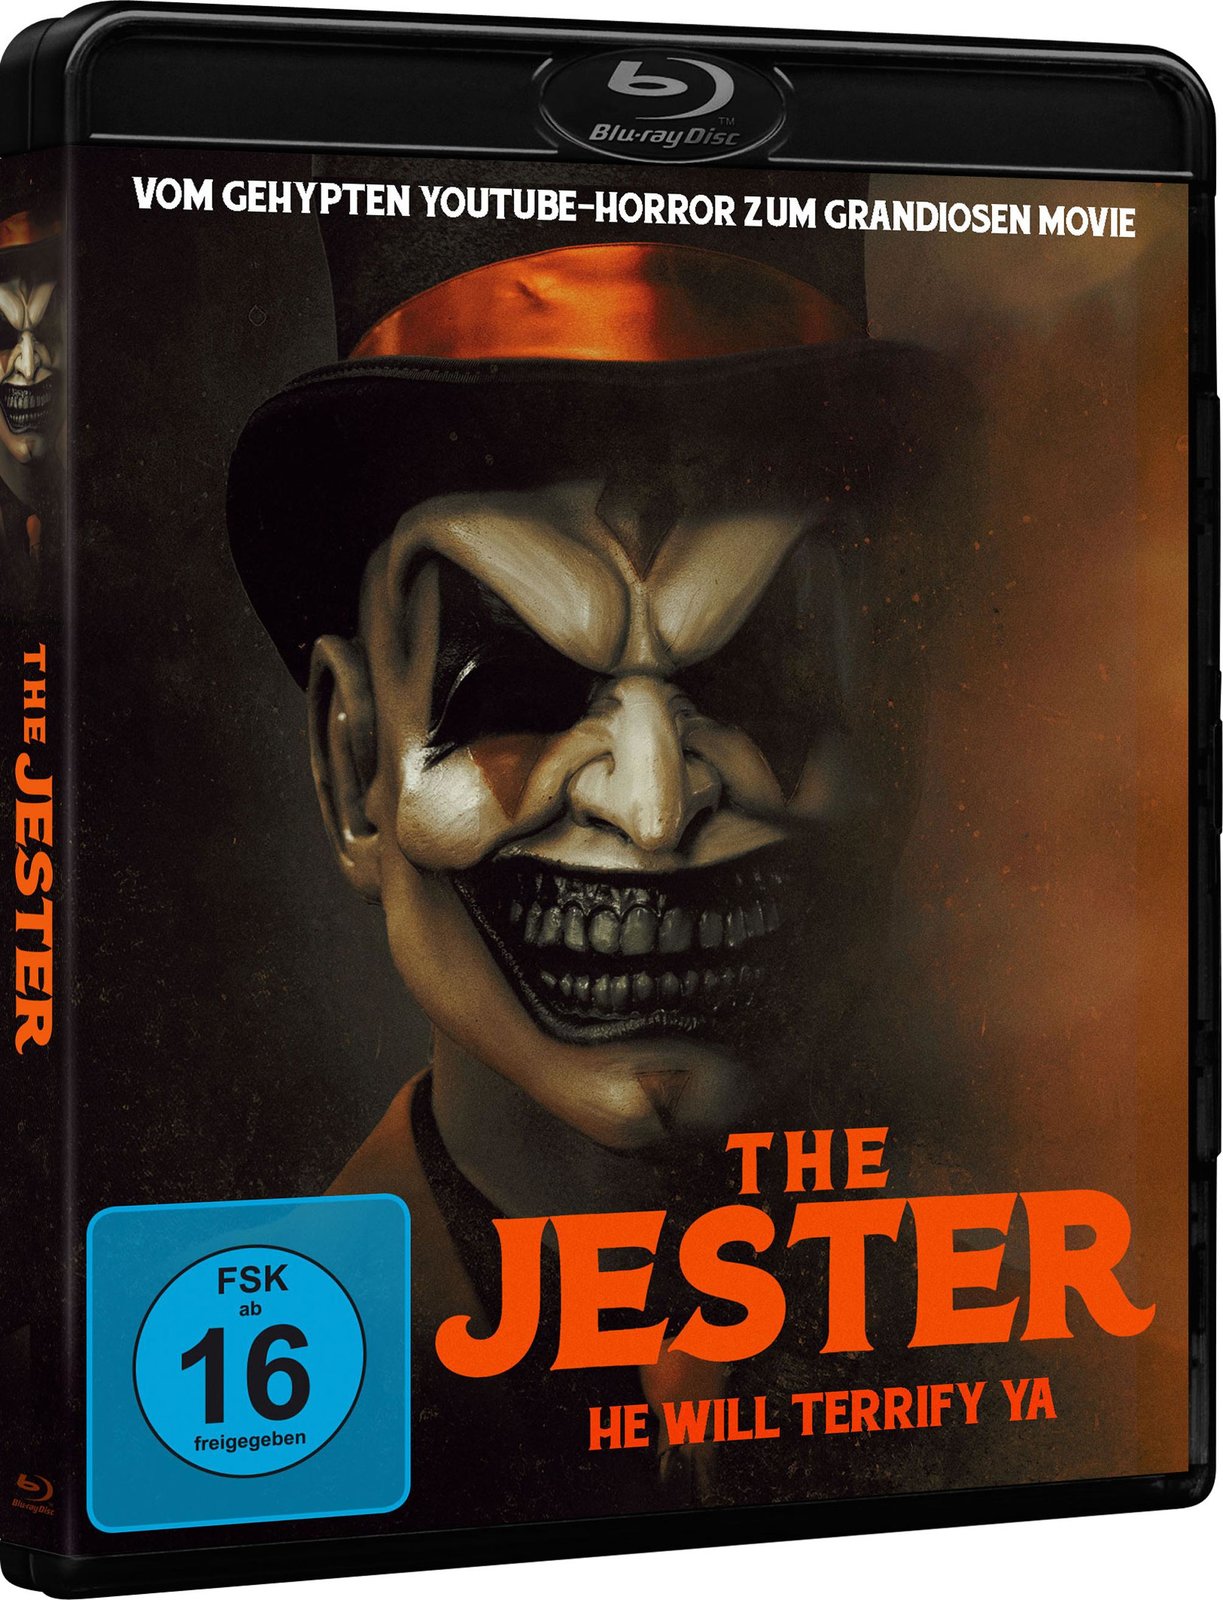 Jester, The - He will terrify you (blu-ray)